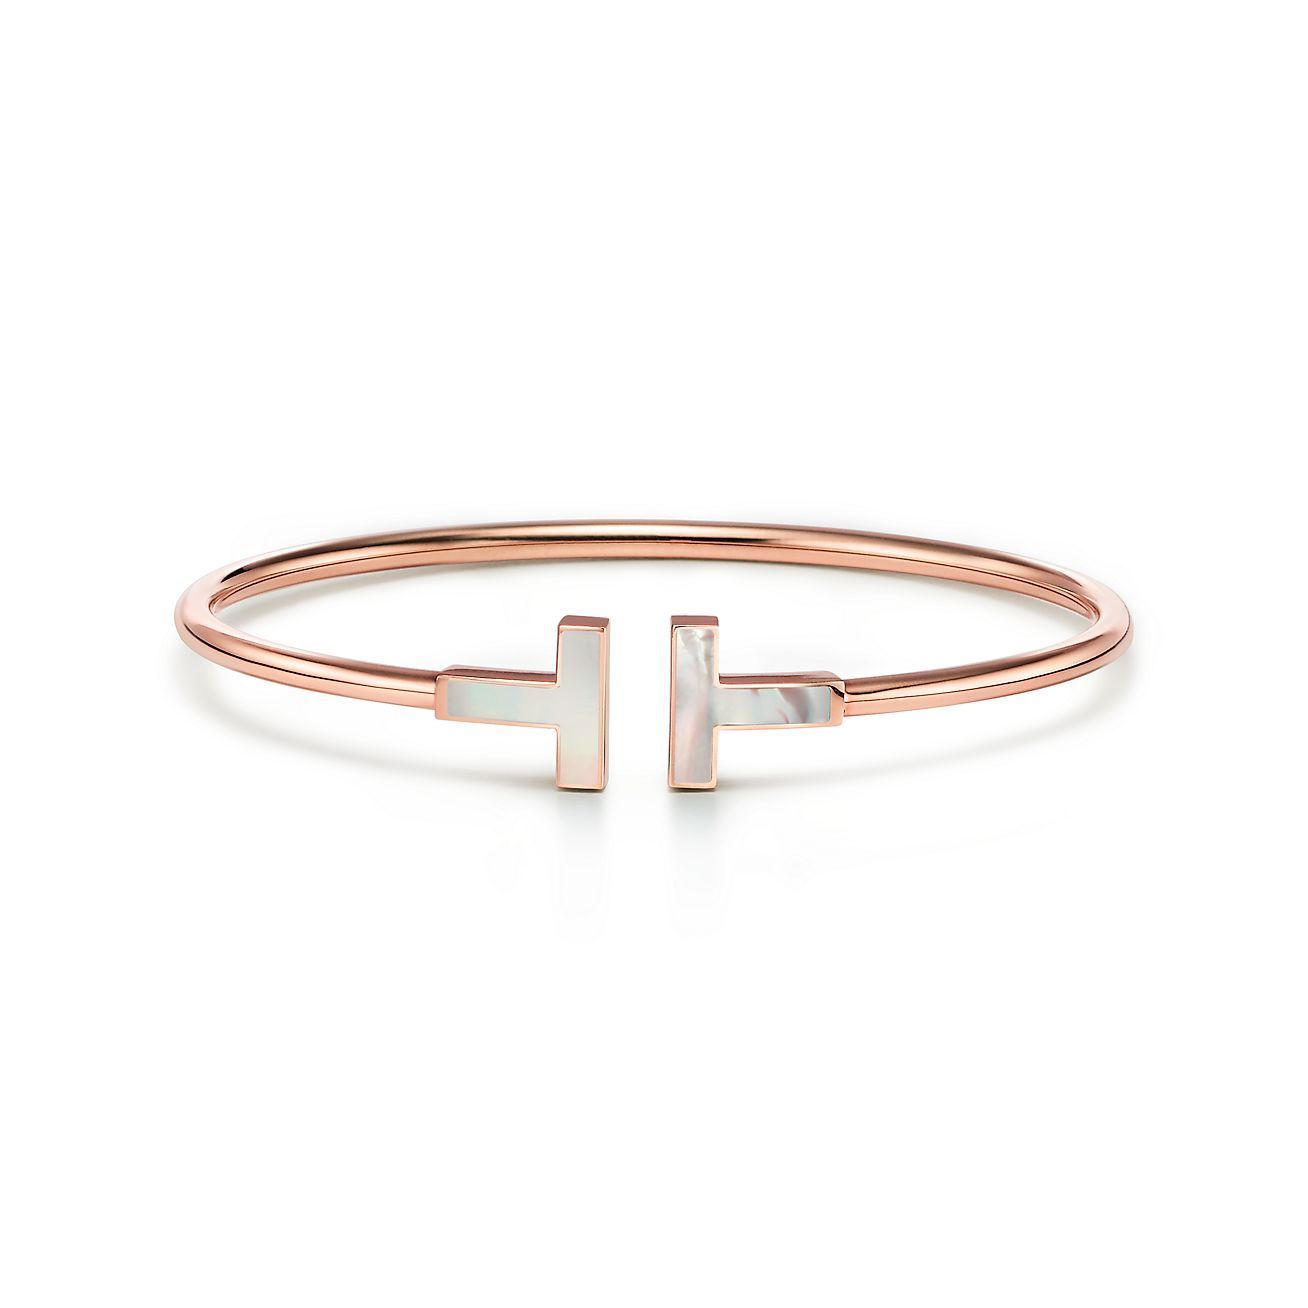 Tiffany T Wire Bracelet in Rose Gold with Mother-of-pearl | Tiffany & Co. | Tiffany & Co. (UK)